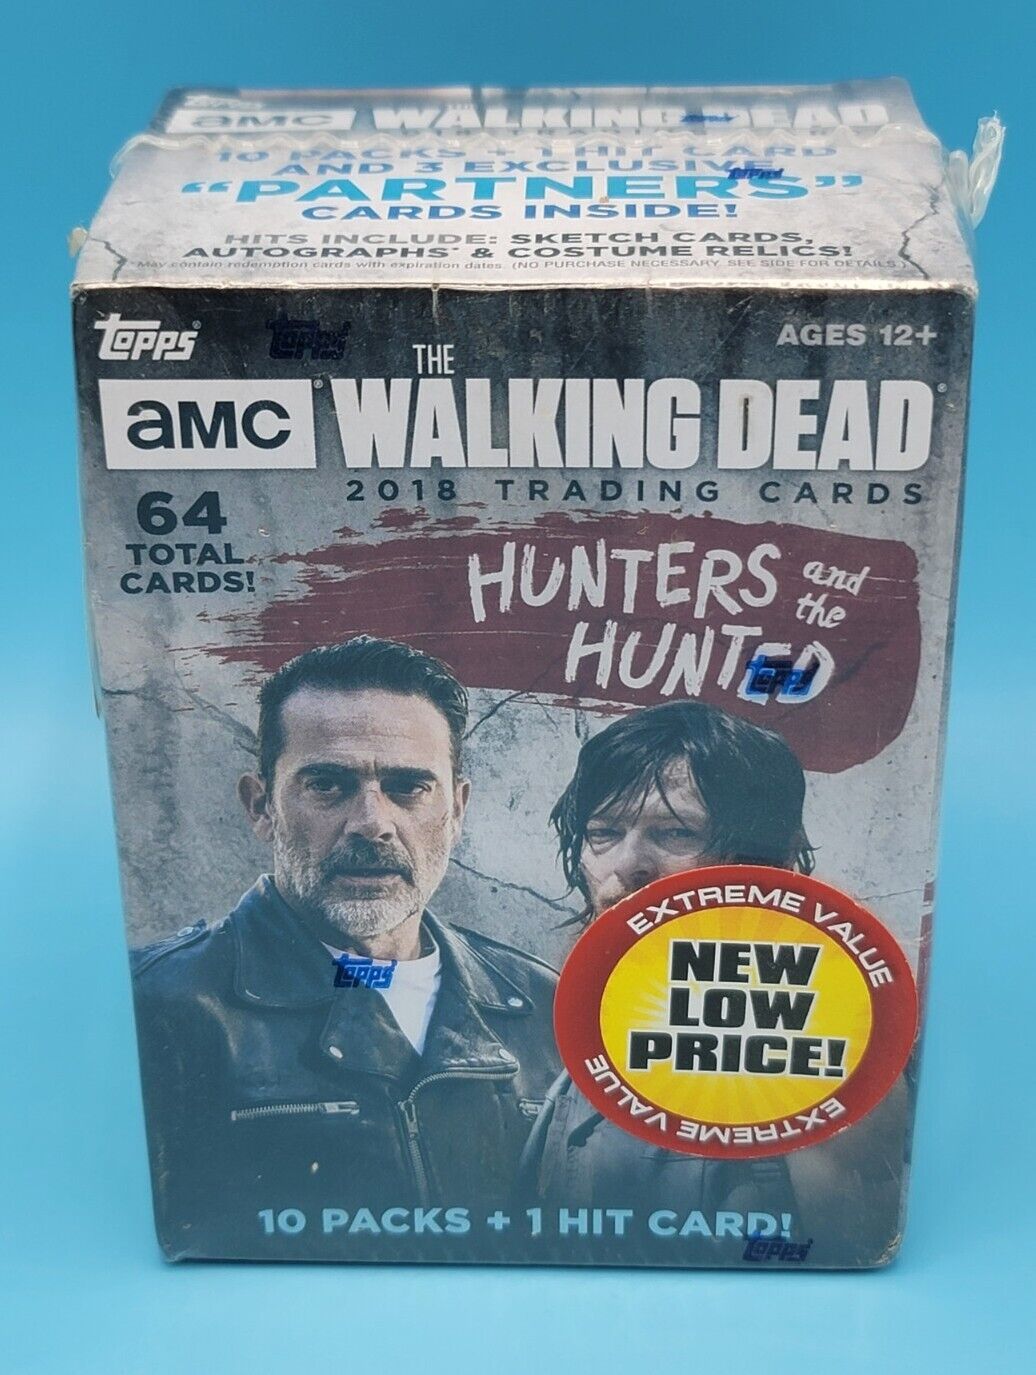 2018 Topps Walking Dead Trading Cards Box Hunters And The Hunted 1 Hit Card